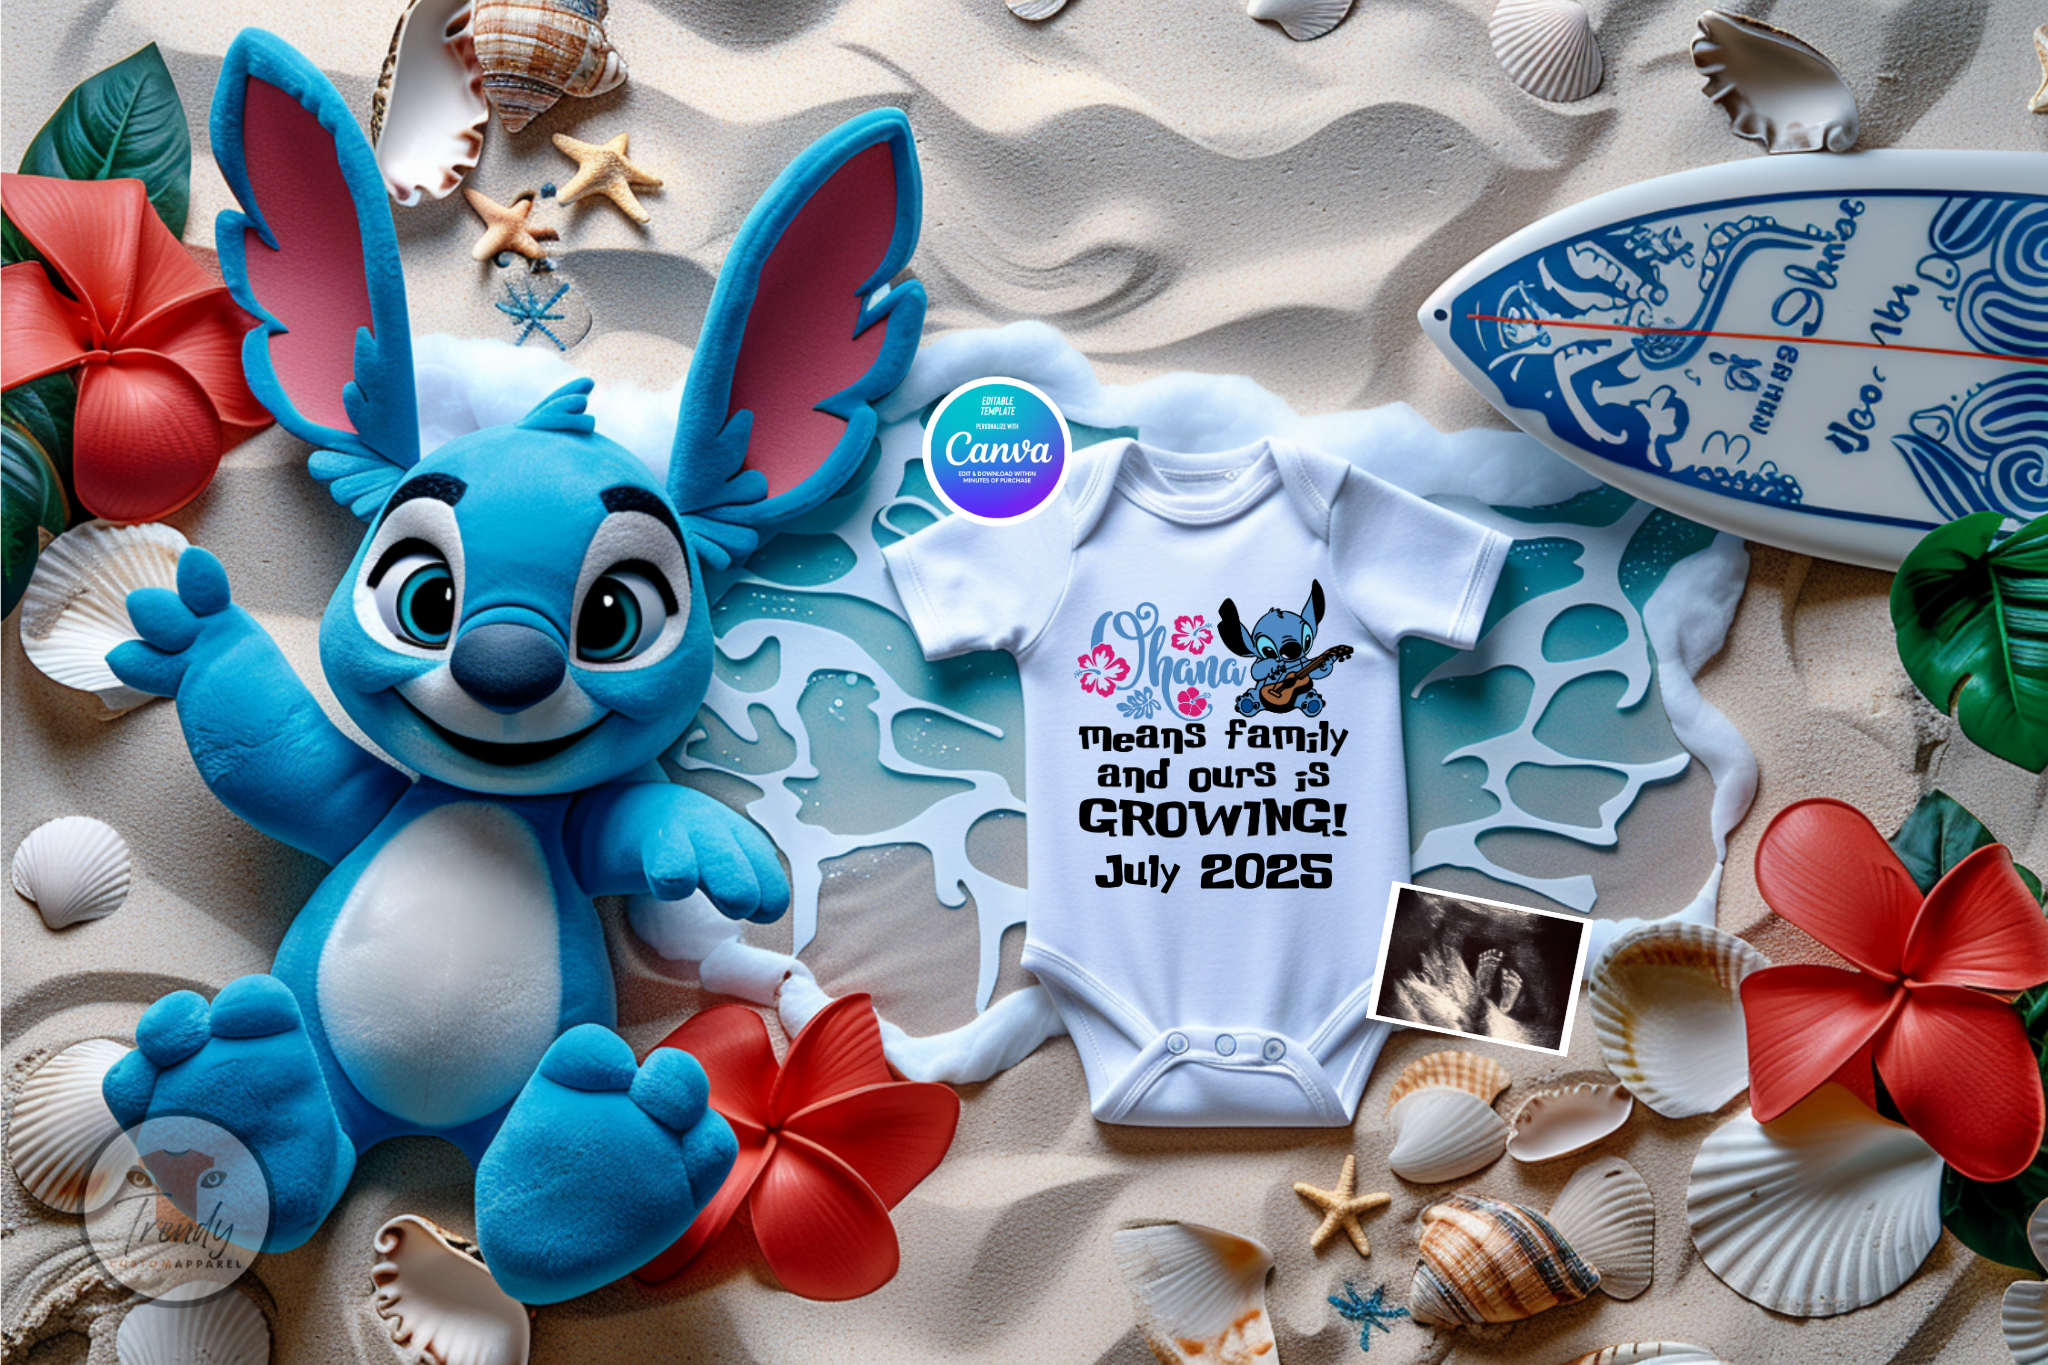 Digital Pregnancy Announcement, Ohana Means Family & Ours is Growing, Customizable Lilo & Stitch Themed, Personalized Editable Template